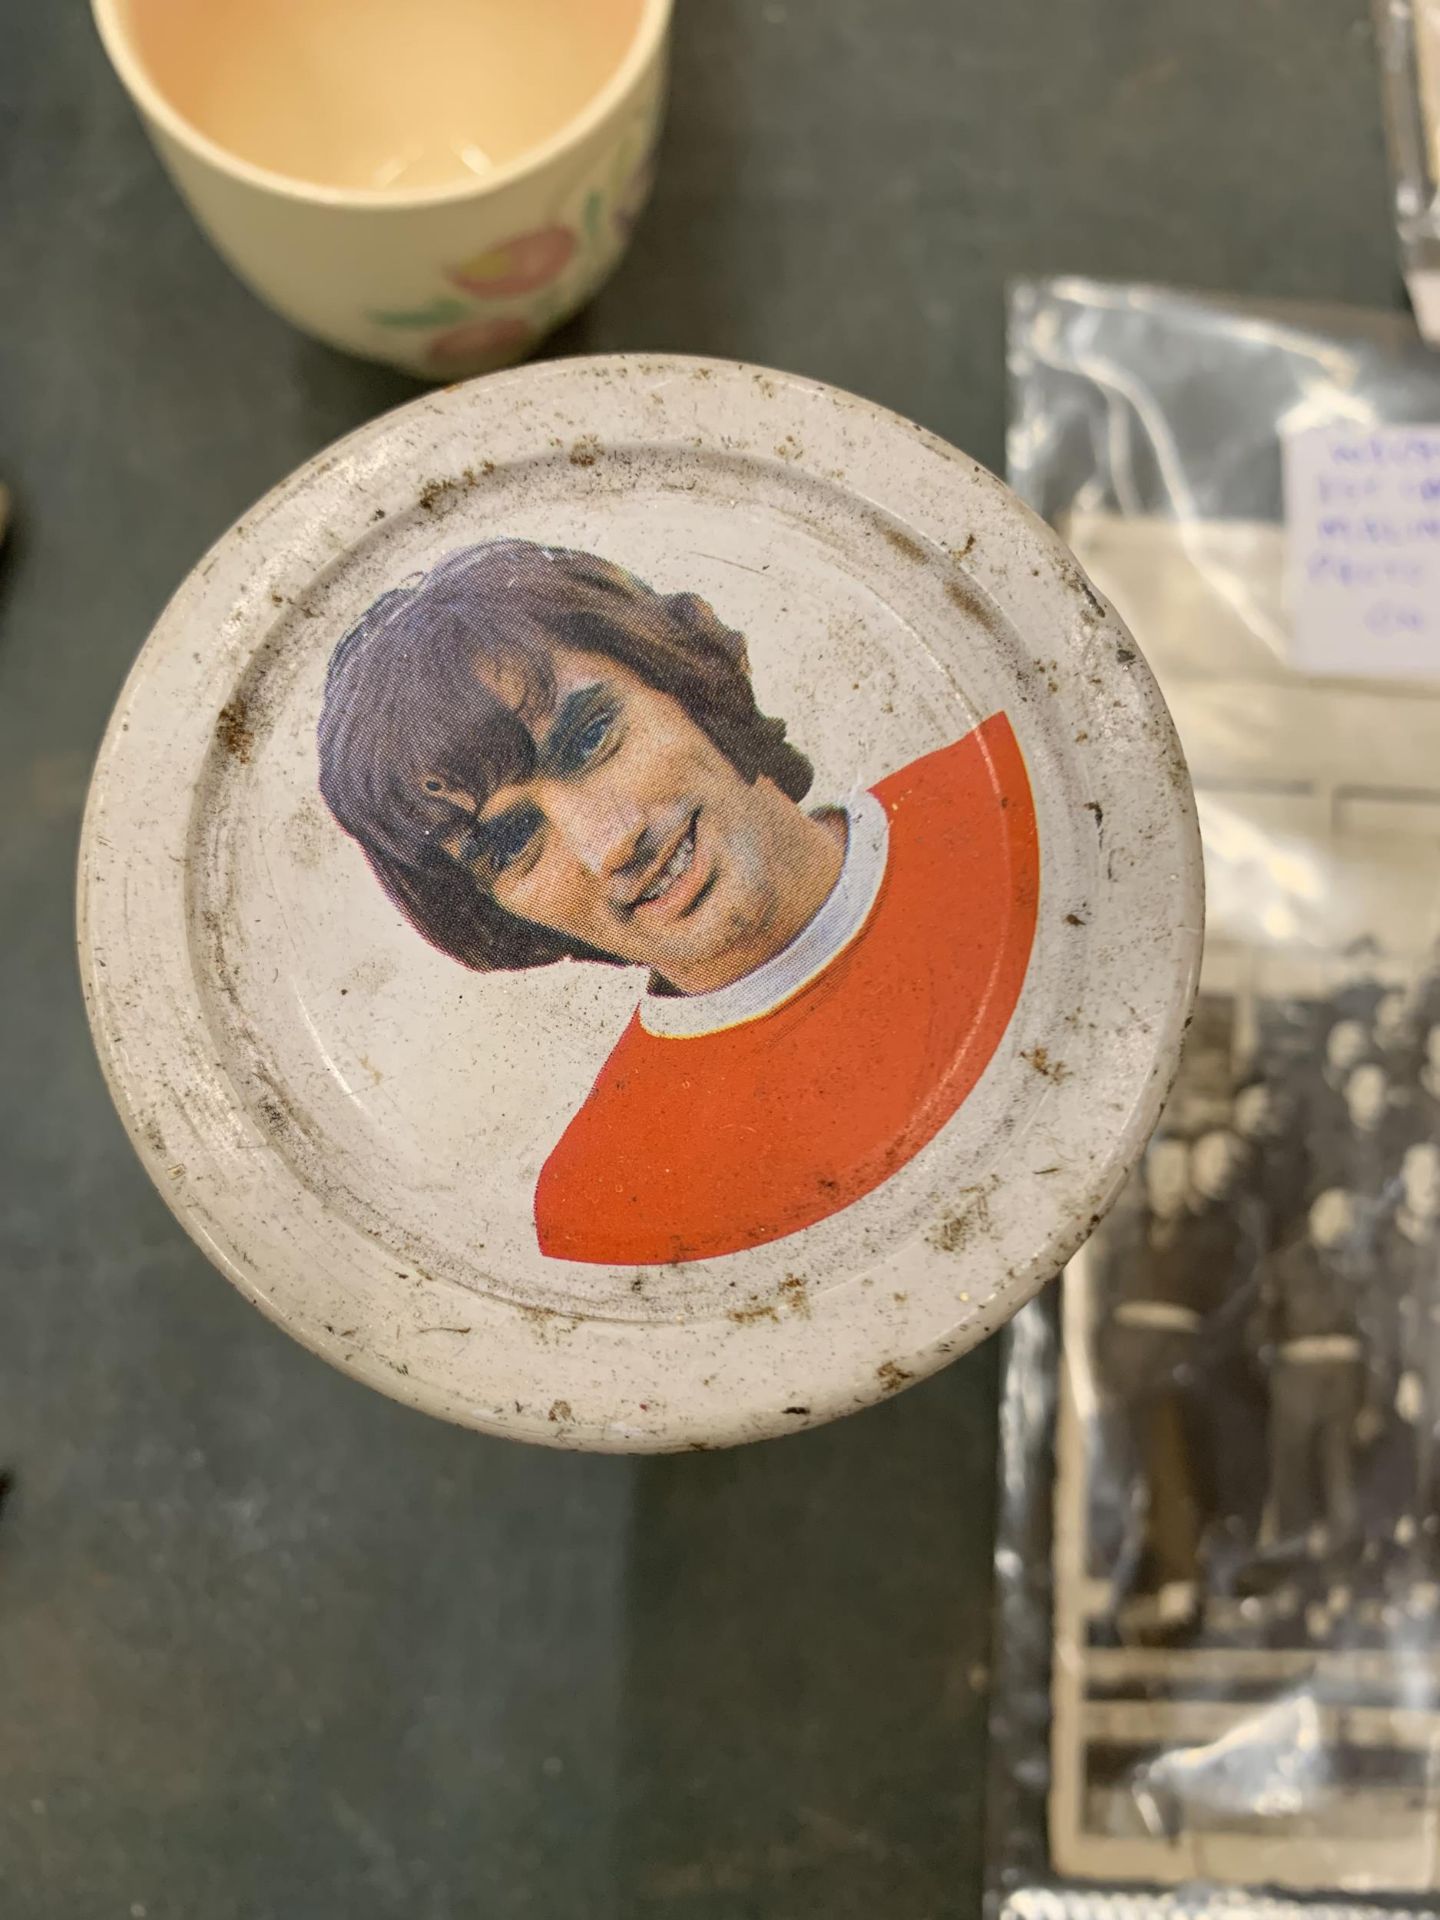 A GEORGE BEST JAR WITH CIGARETTE CARDS - Image 2 of 3